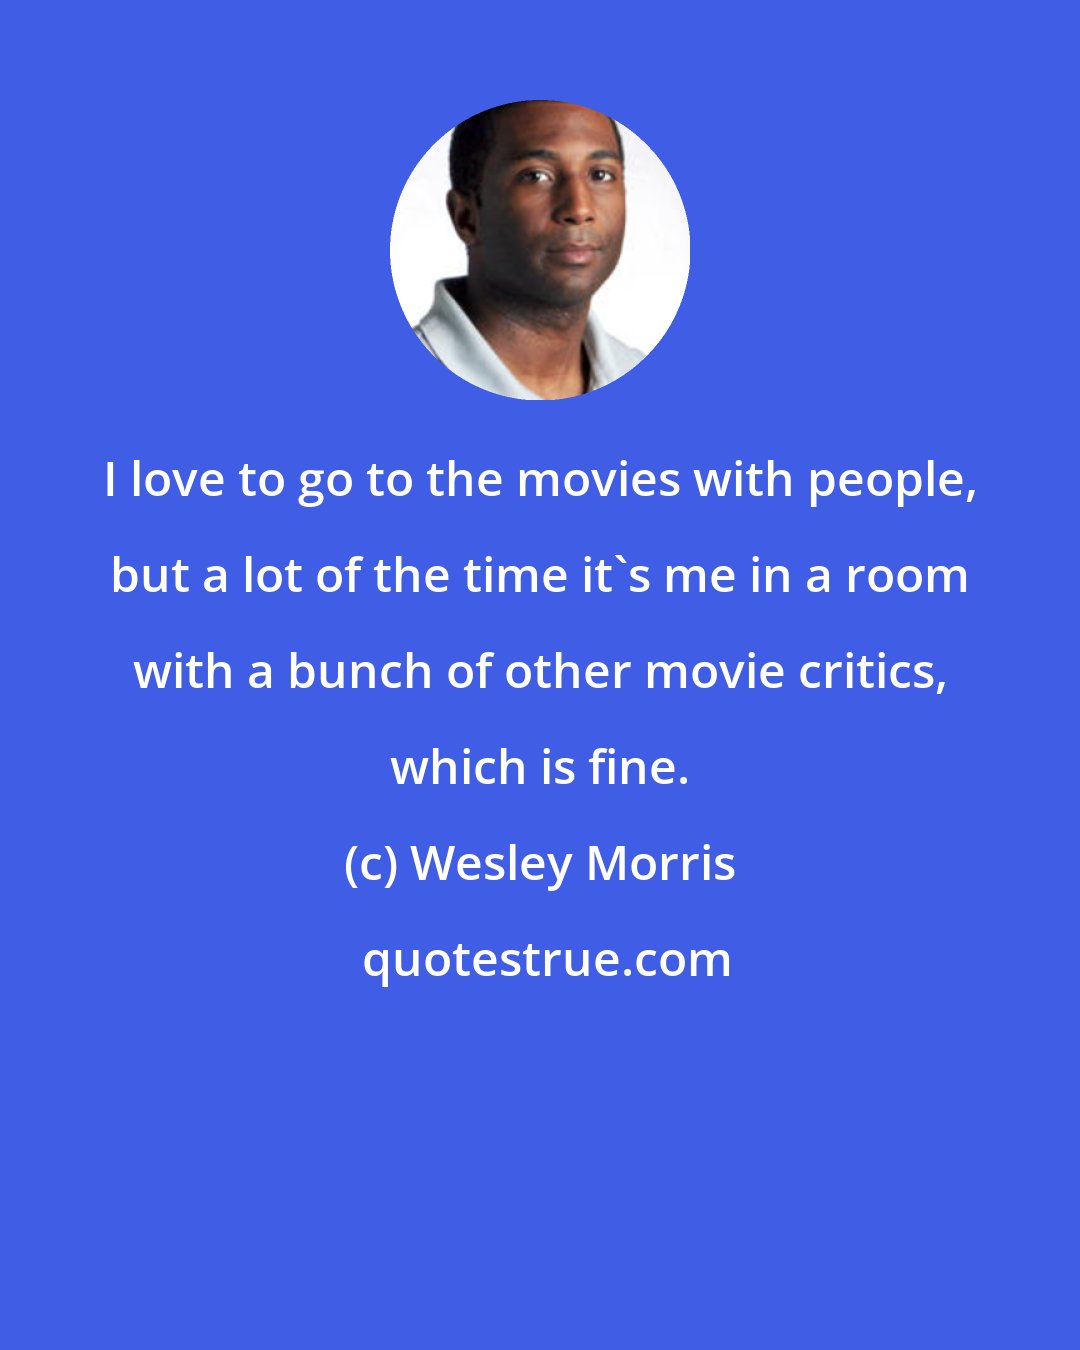 Wesley Morris: I love to go to the movies with people, but a lot of the time it's me in a room with a bunch of other movie critics, which is fine.